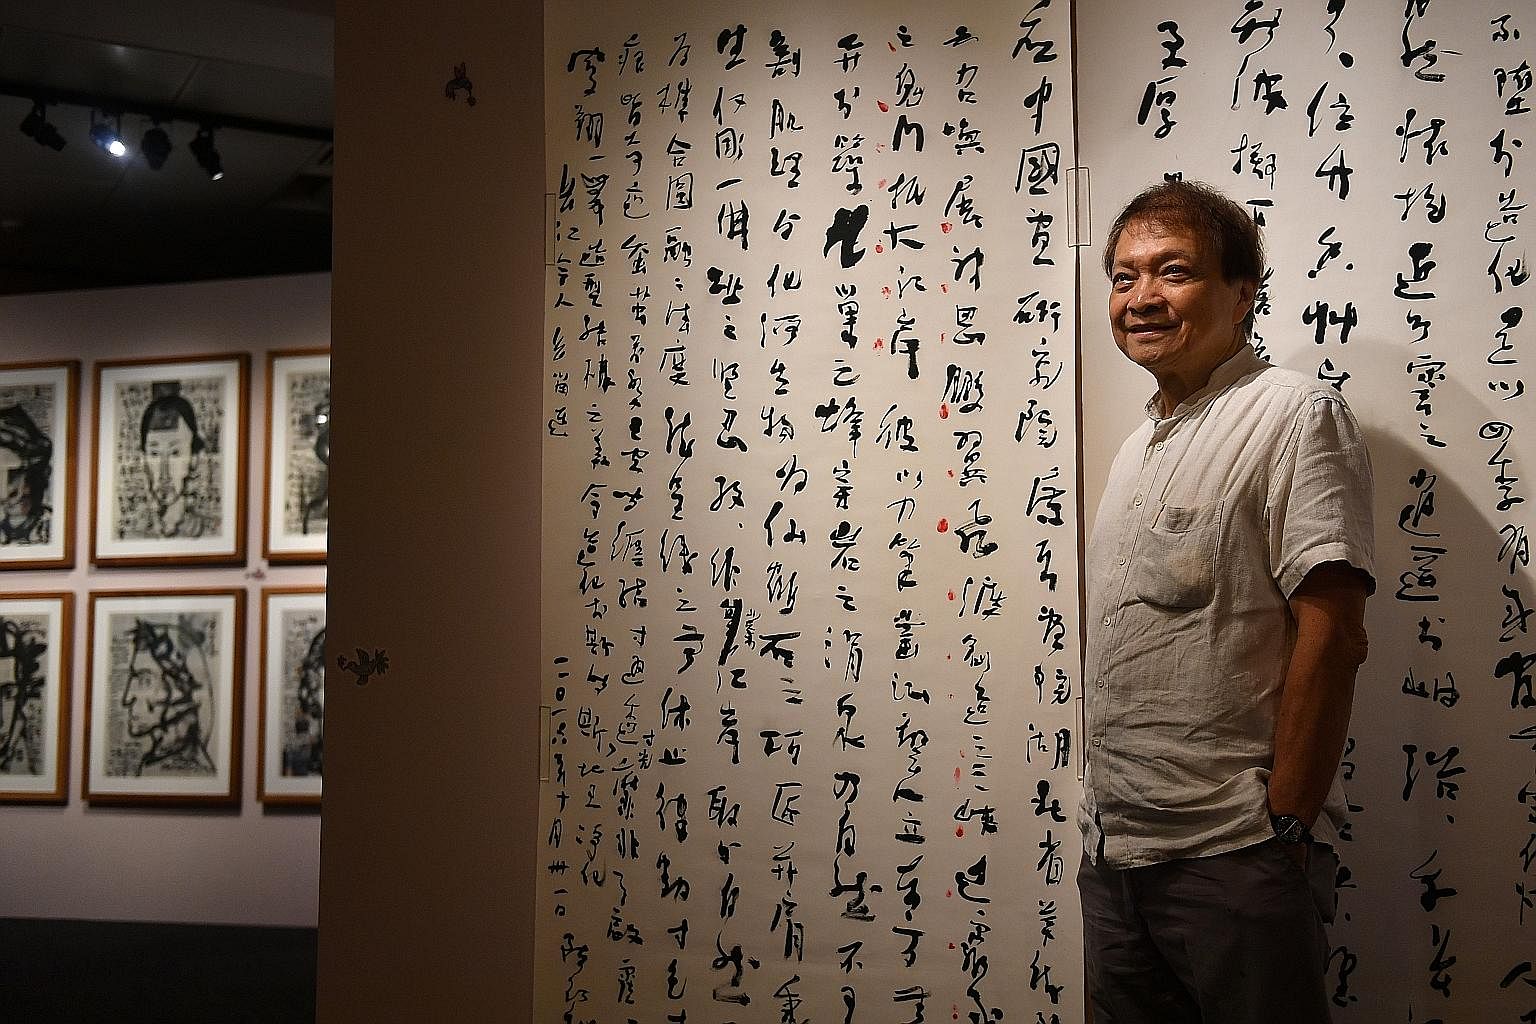 Artist Tan Swie Hian at the National Library’s exhibition of his artworks, Anatomy Of A Free Mind – his biggest show to date. More than 100 of his works will be on display until April 24. Behind him is The Preface To Tour Of Three Gorges Stone Engravings 